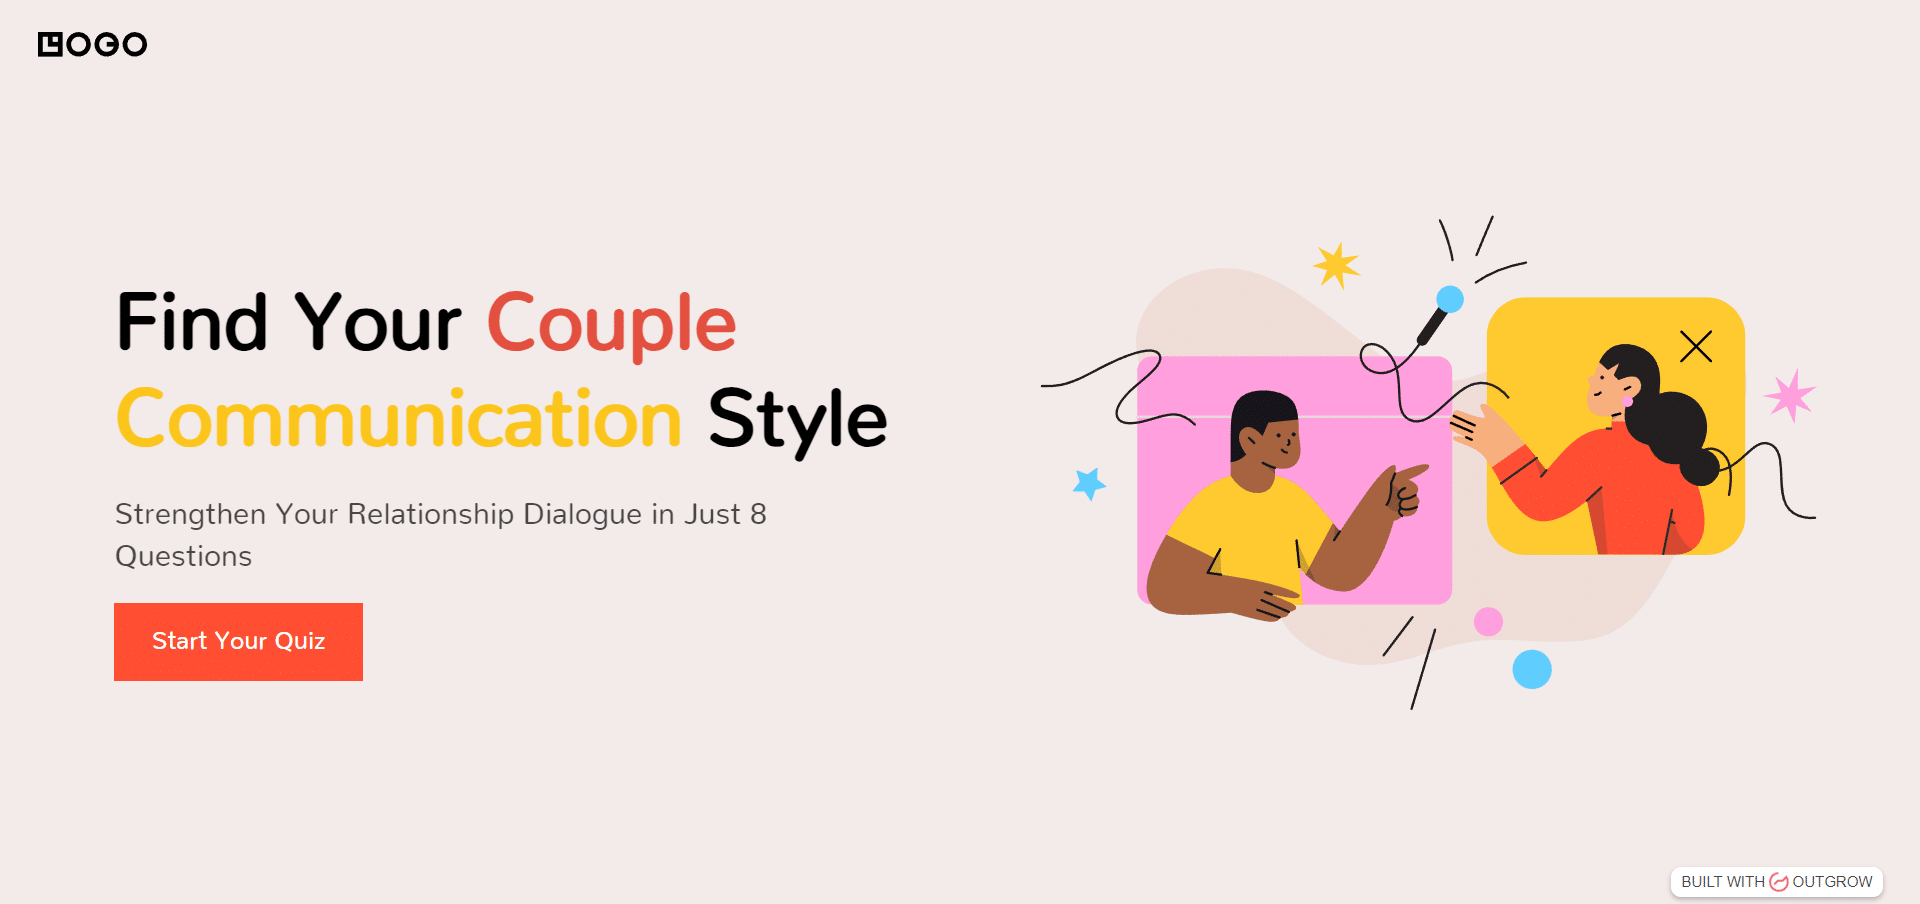 Find Your Couple Communication Style